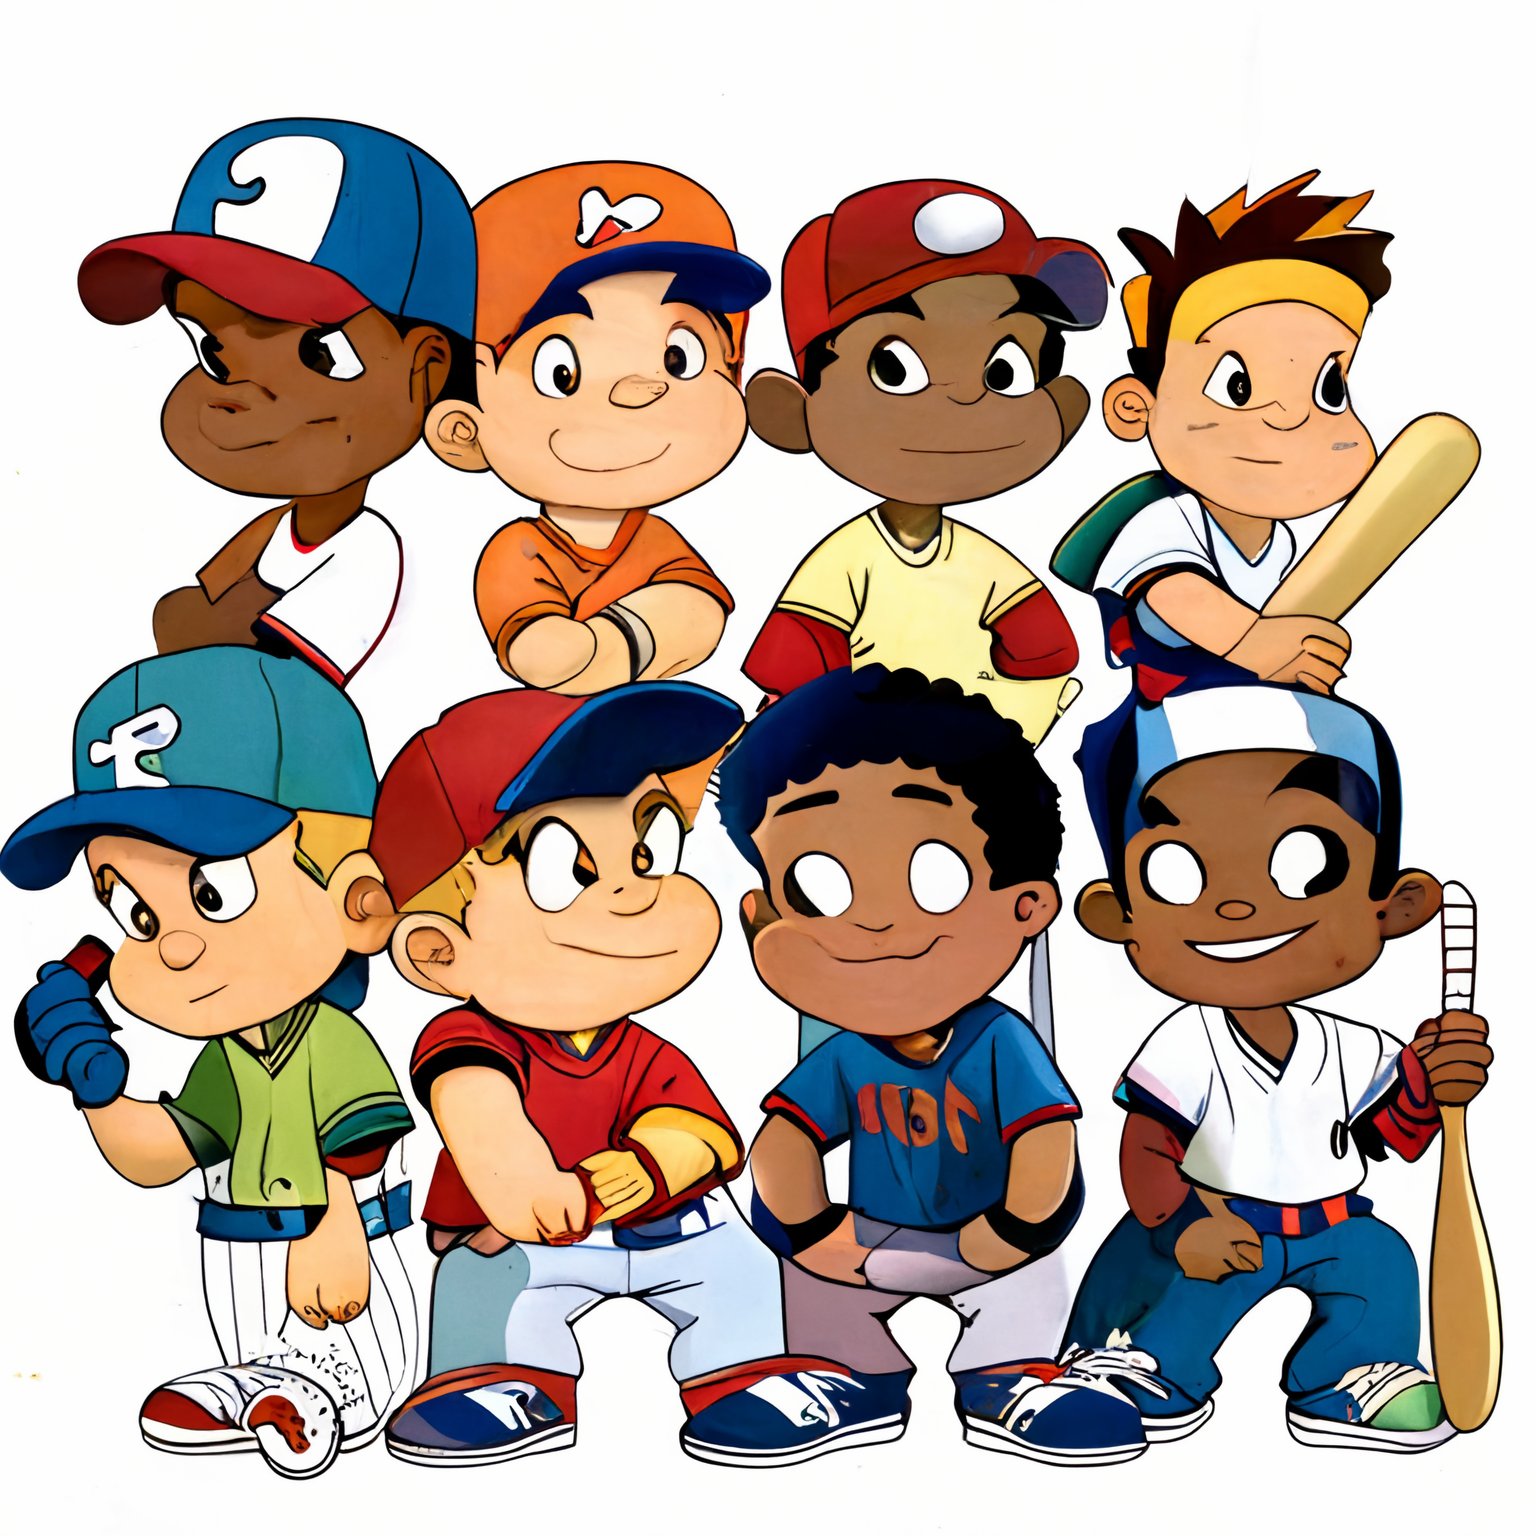 Create a picture of multiple cartoon baseball players showing off their skills the players should be